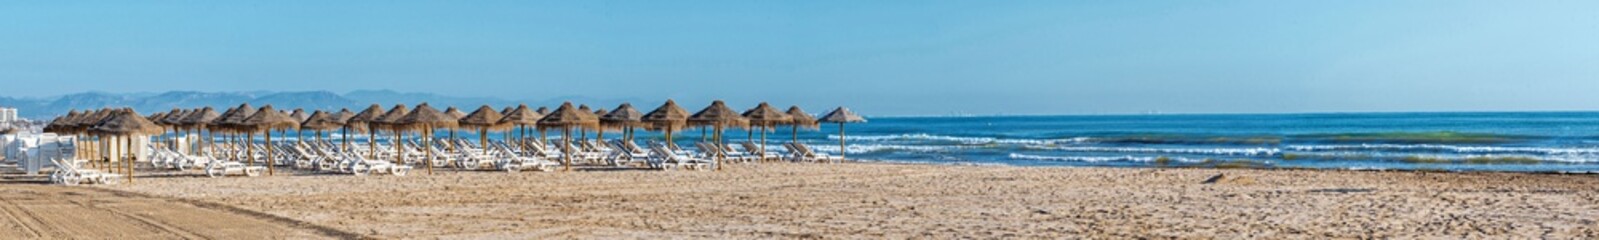 Panoramic view of straw umbrellas and beach loungers on Malvarrosa sand beach in Valencia